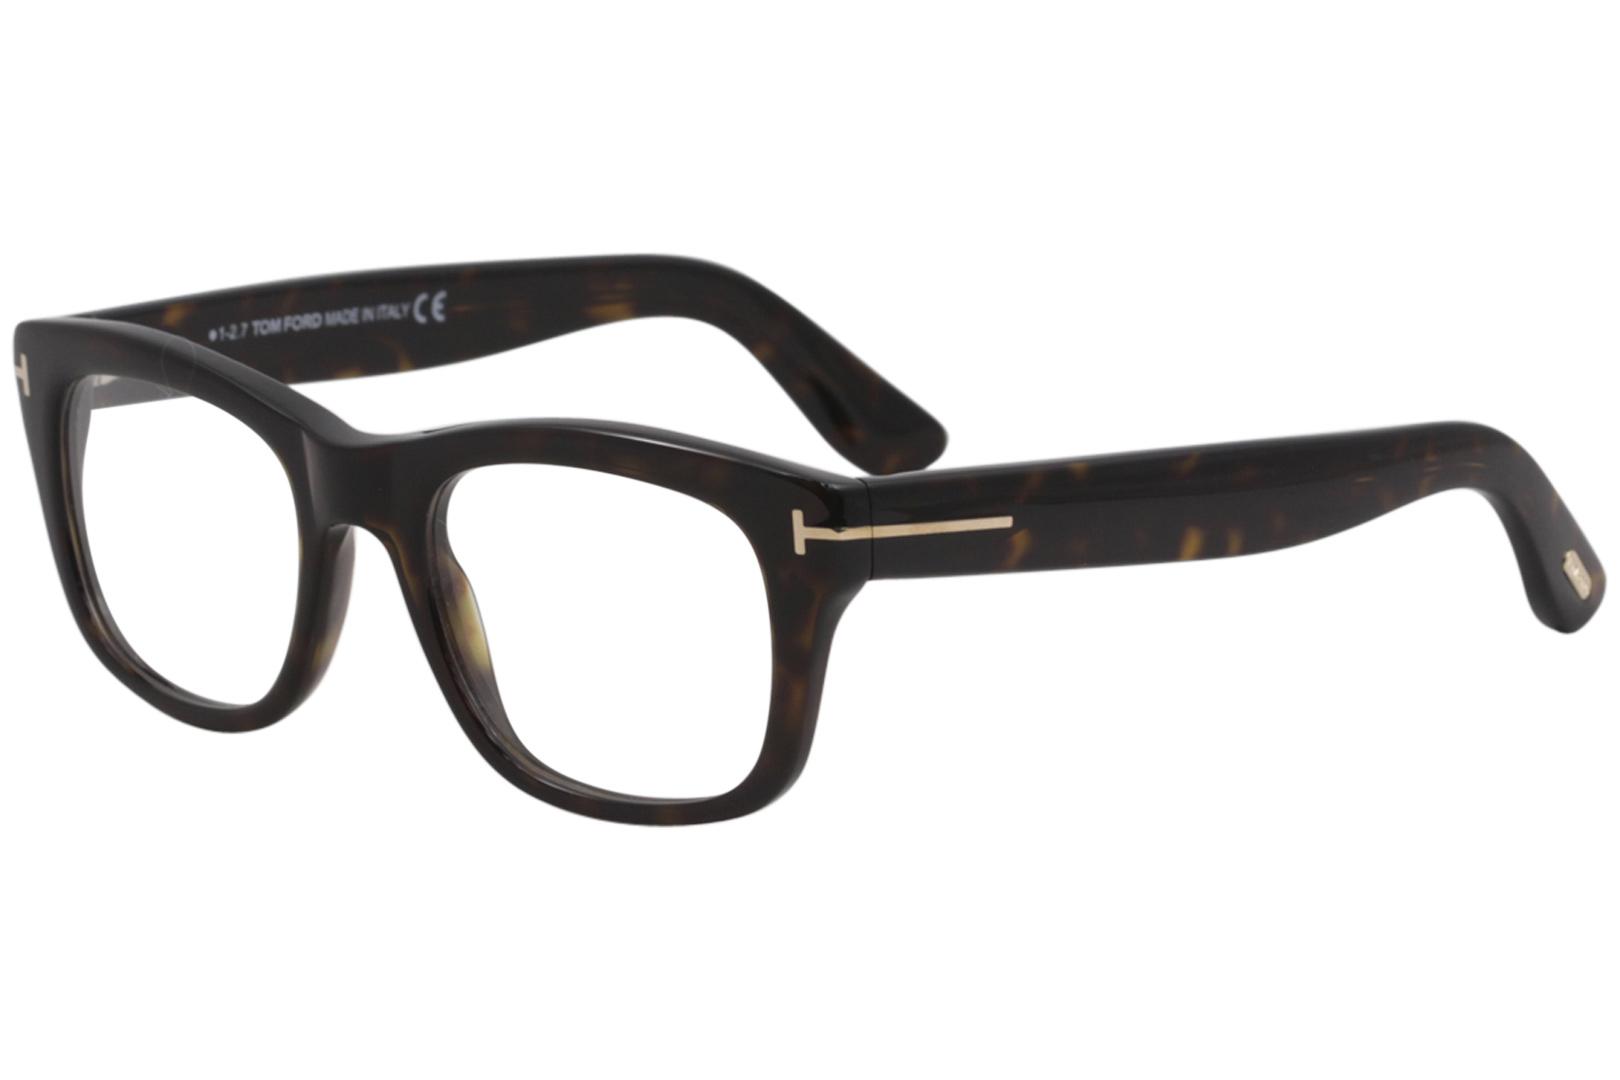 Tom Ford Eyeglasses: A Visionary Blend of Luxury and Modernity